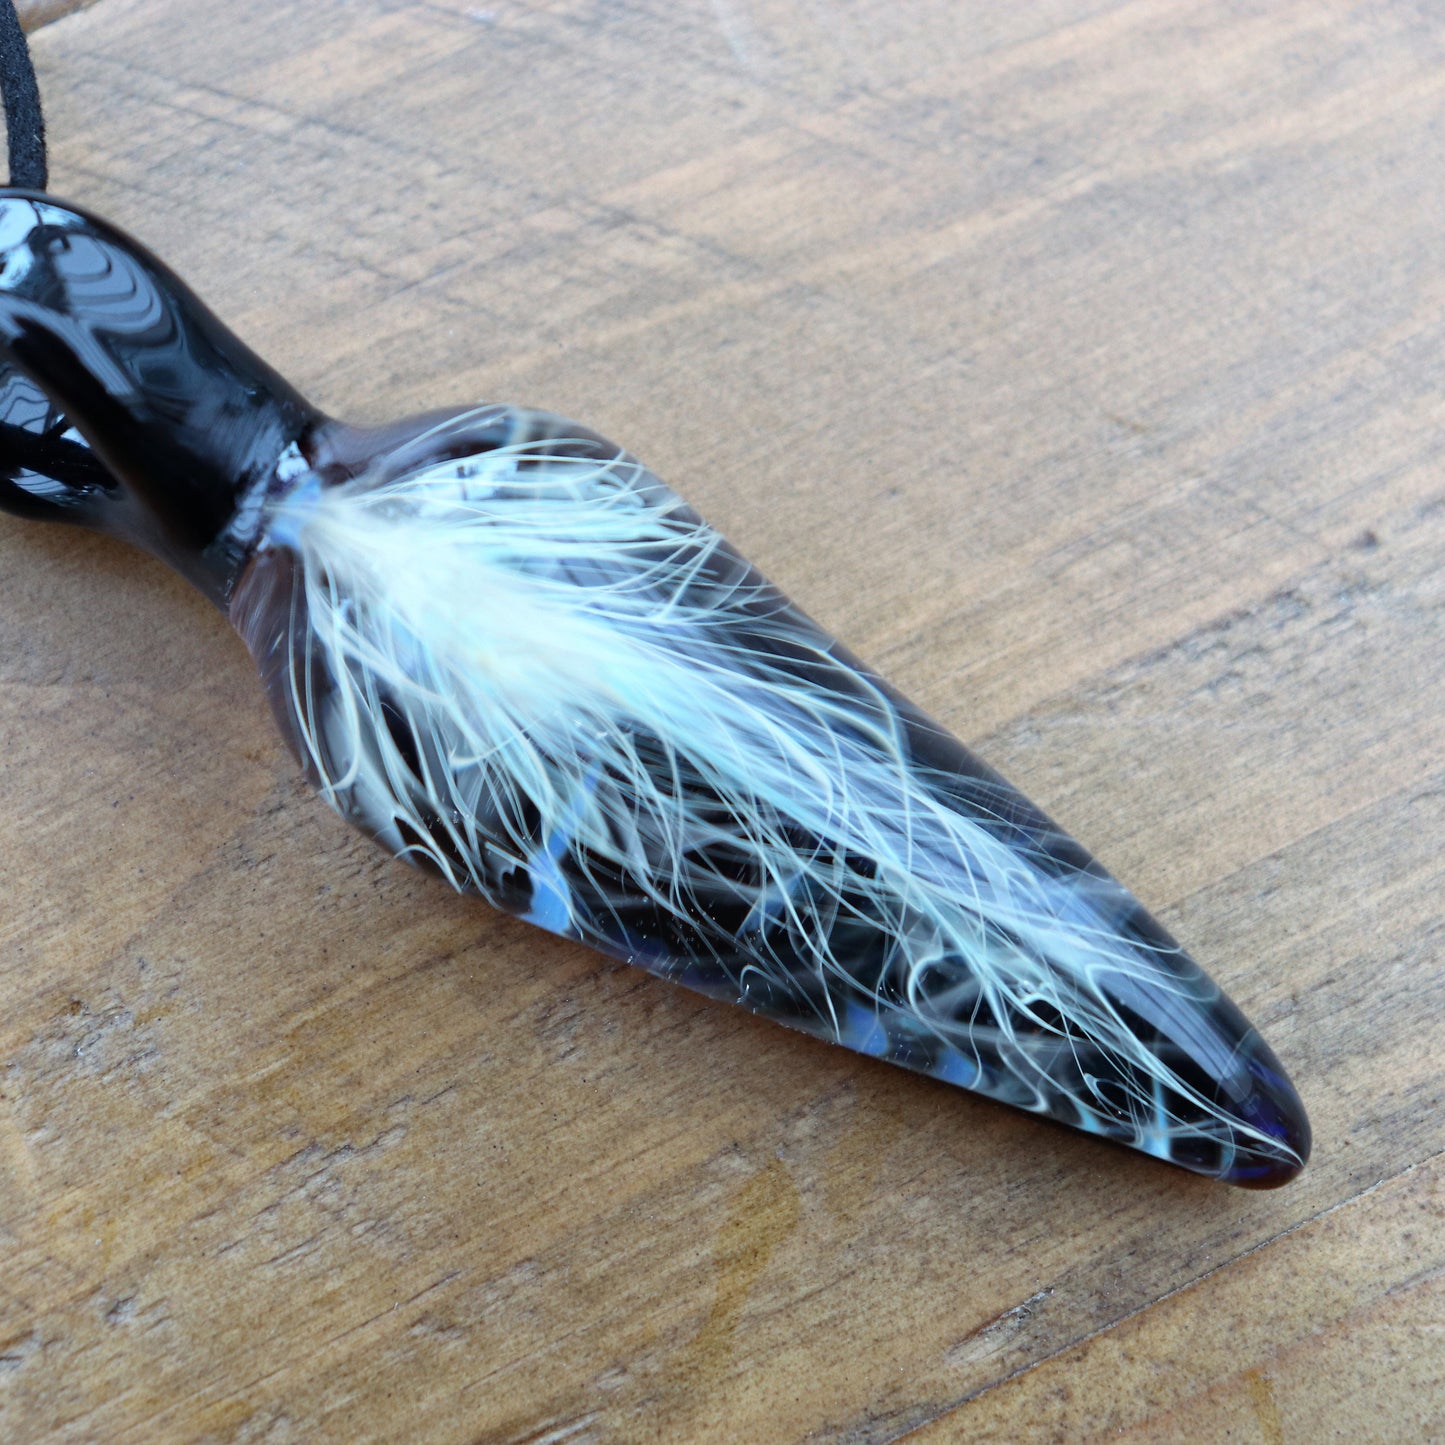 Memorial Glass Pendant "Lightning" Handcrafted Pendant Memorial Art Lightning Feather Necklace Memorial Jewelry Cremation Jewelry